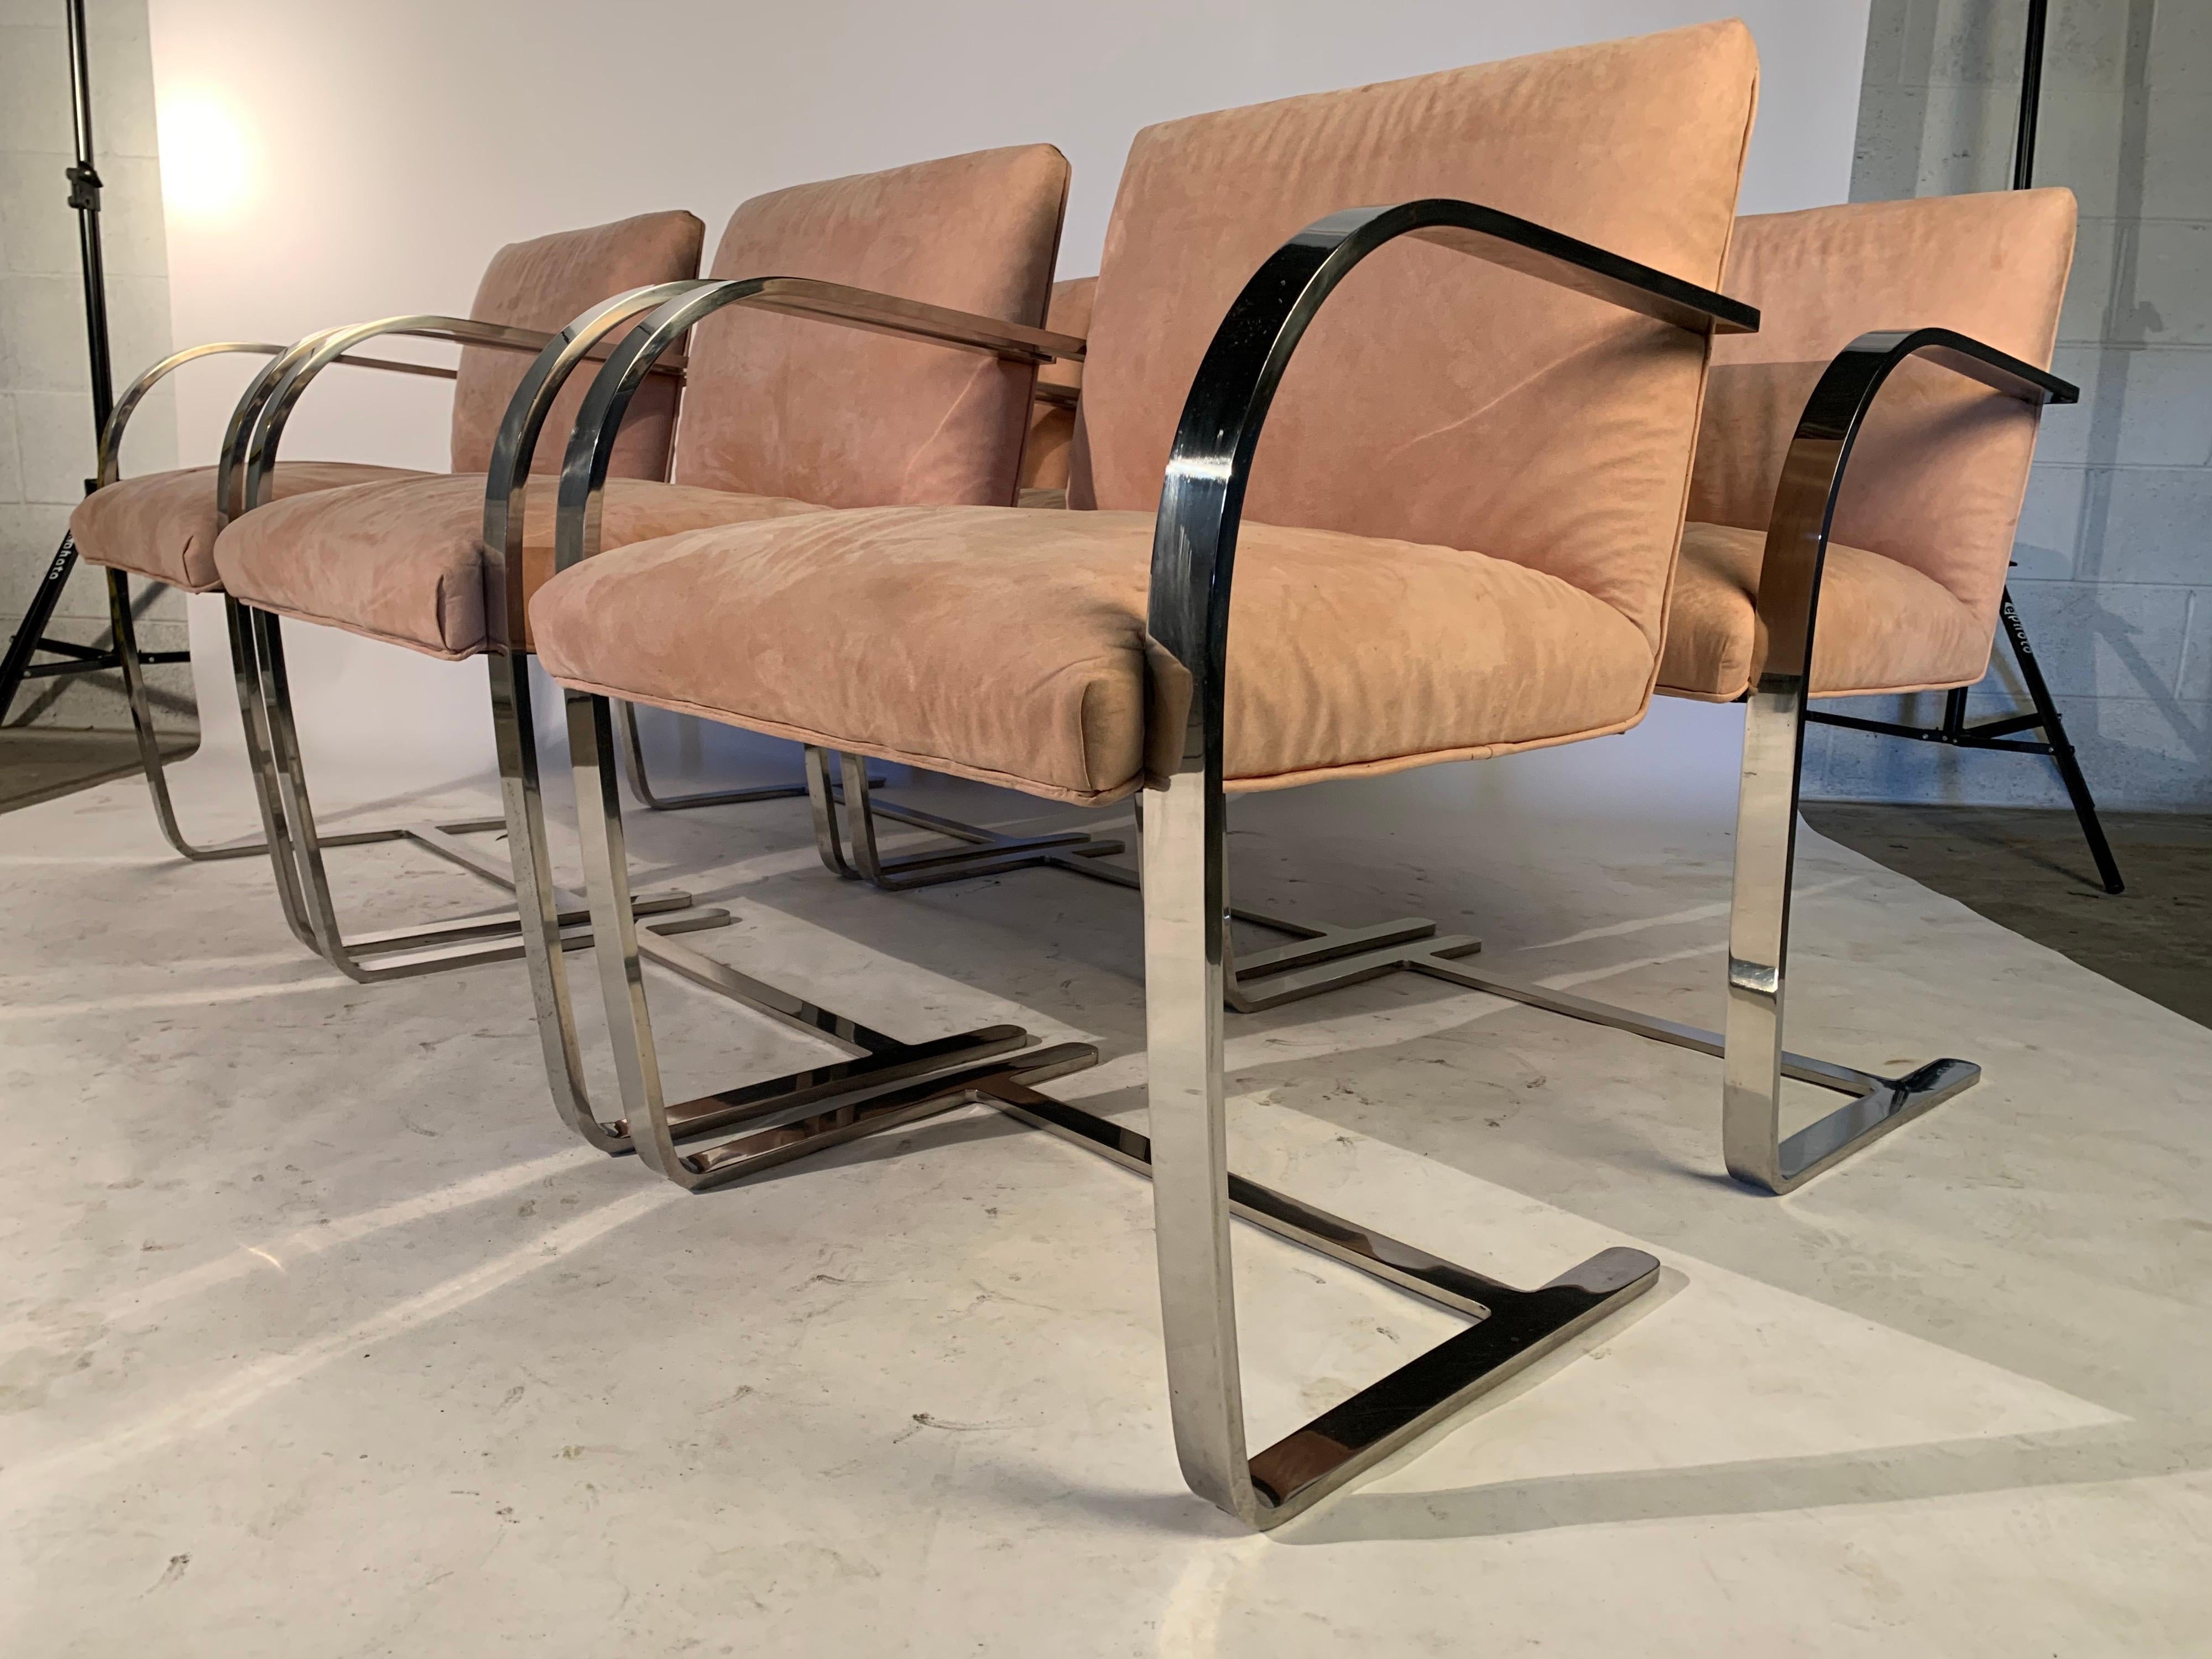 A set of 6 solid chromed steel flat bar cantilever Brno dining chairs designed by Mies van der Rohe and produced in Italy. Extremely comfortable design with striking lines and solid construction.
Some spotting stains to the seats as seen in the